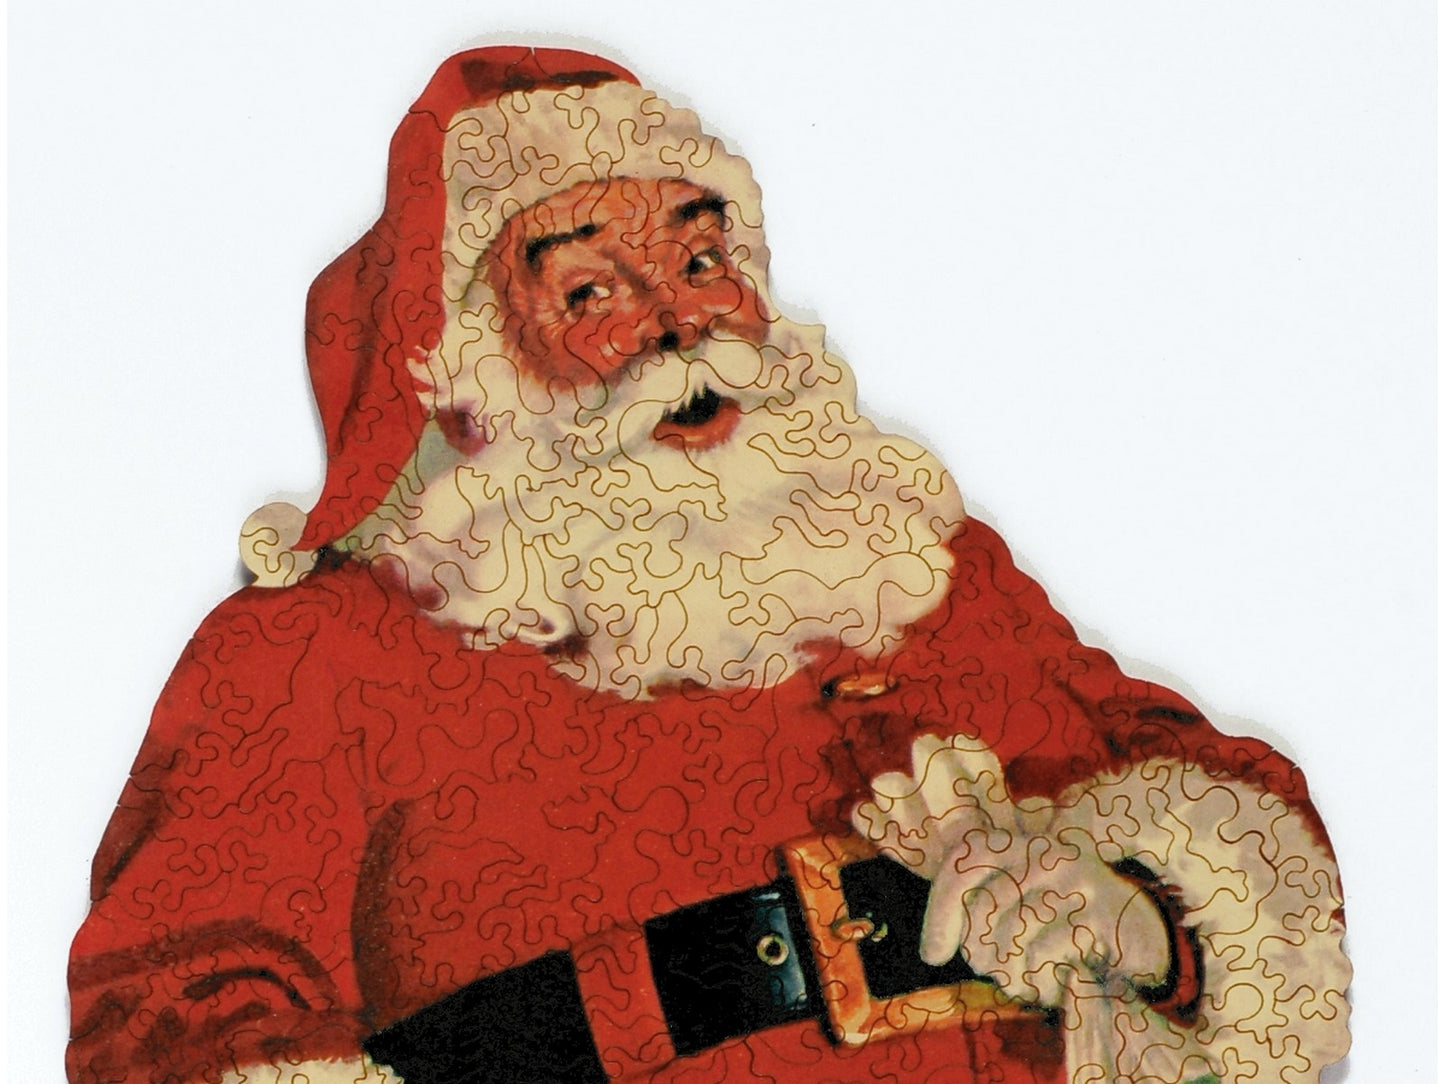 A closeup of the front of the puzzle, Jolly Old St. Nick.